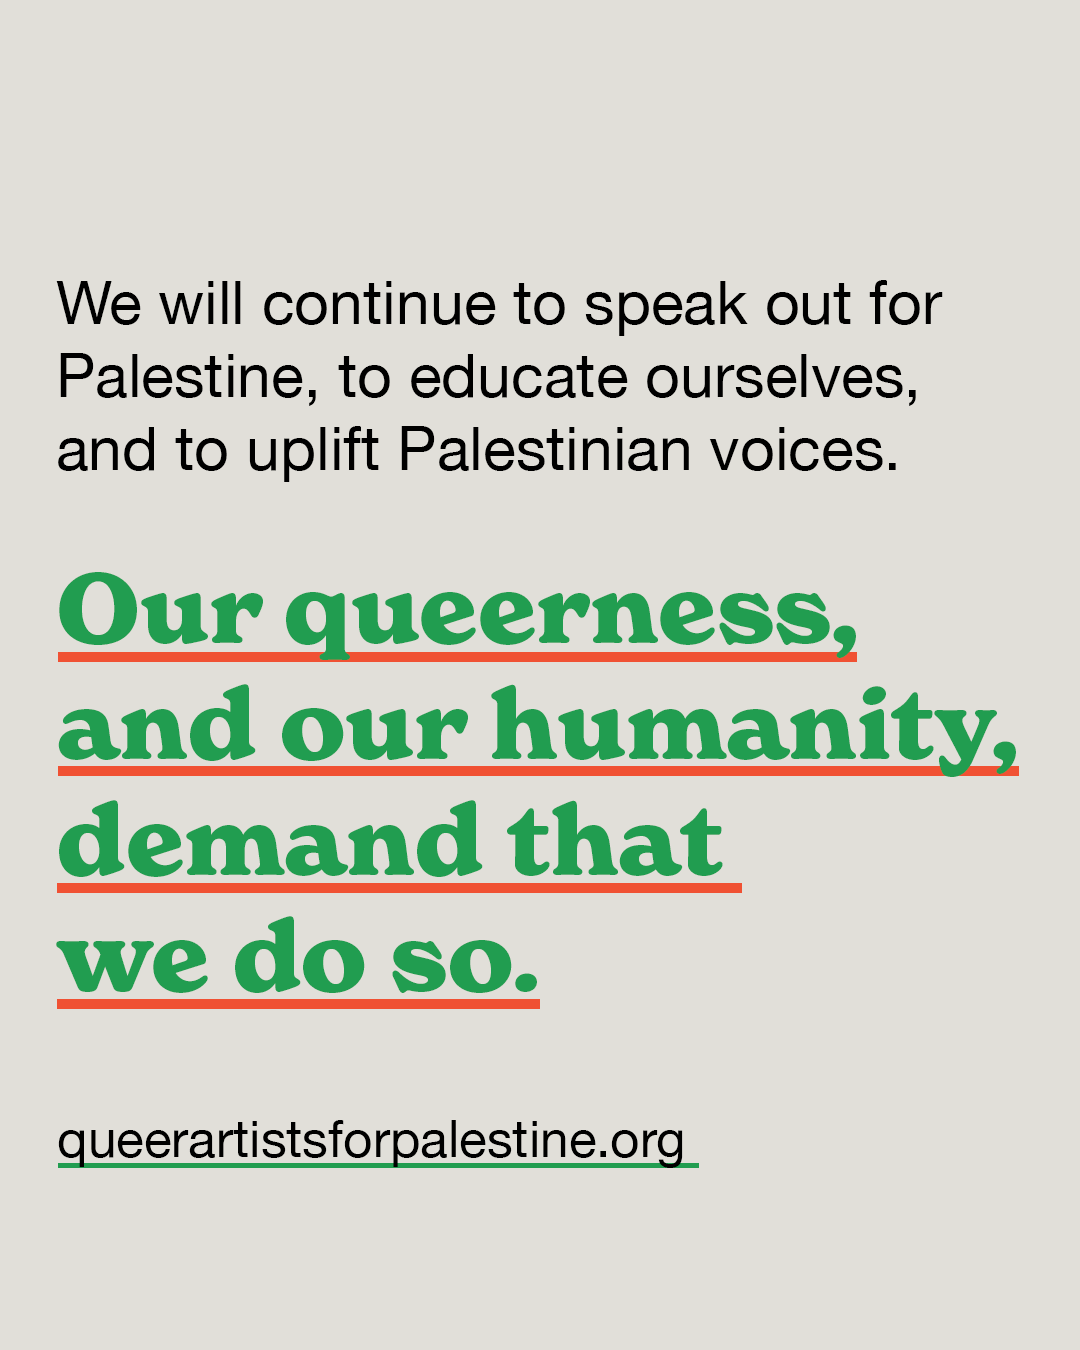 We will continue to speak out or Palestine, to educate ourselves, to uplist Palestinian voices. Our queerness and our humanity demand that we do so. 